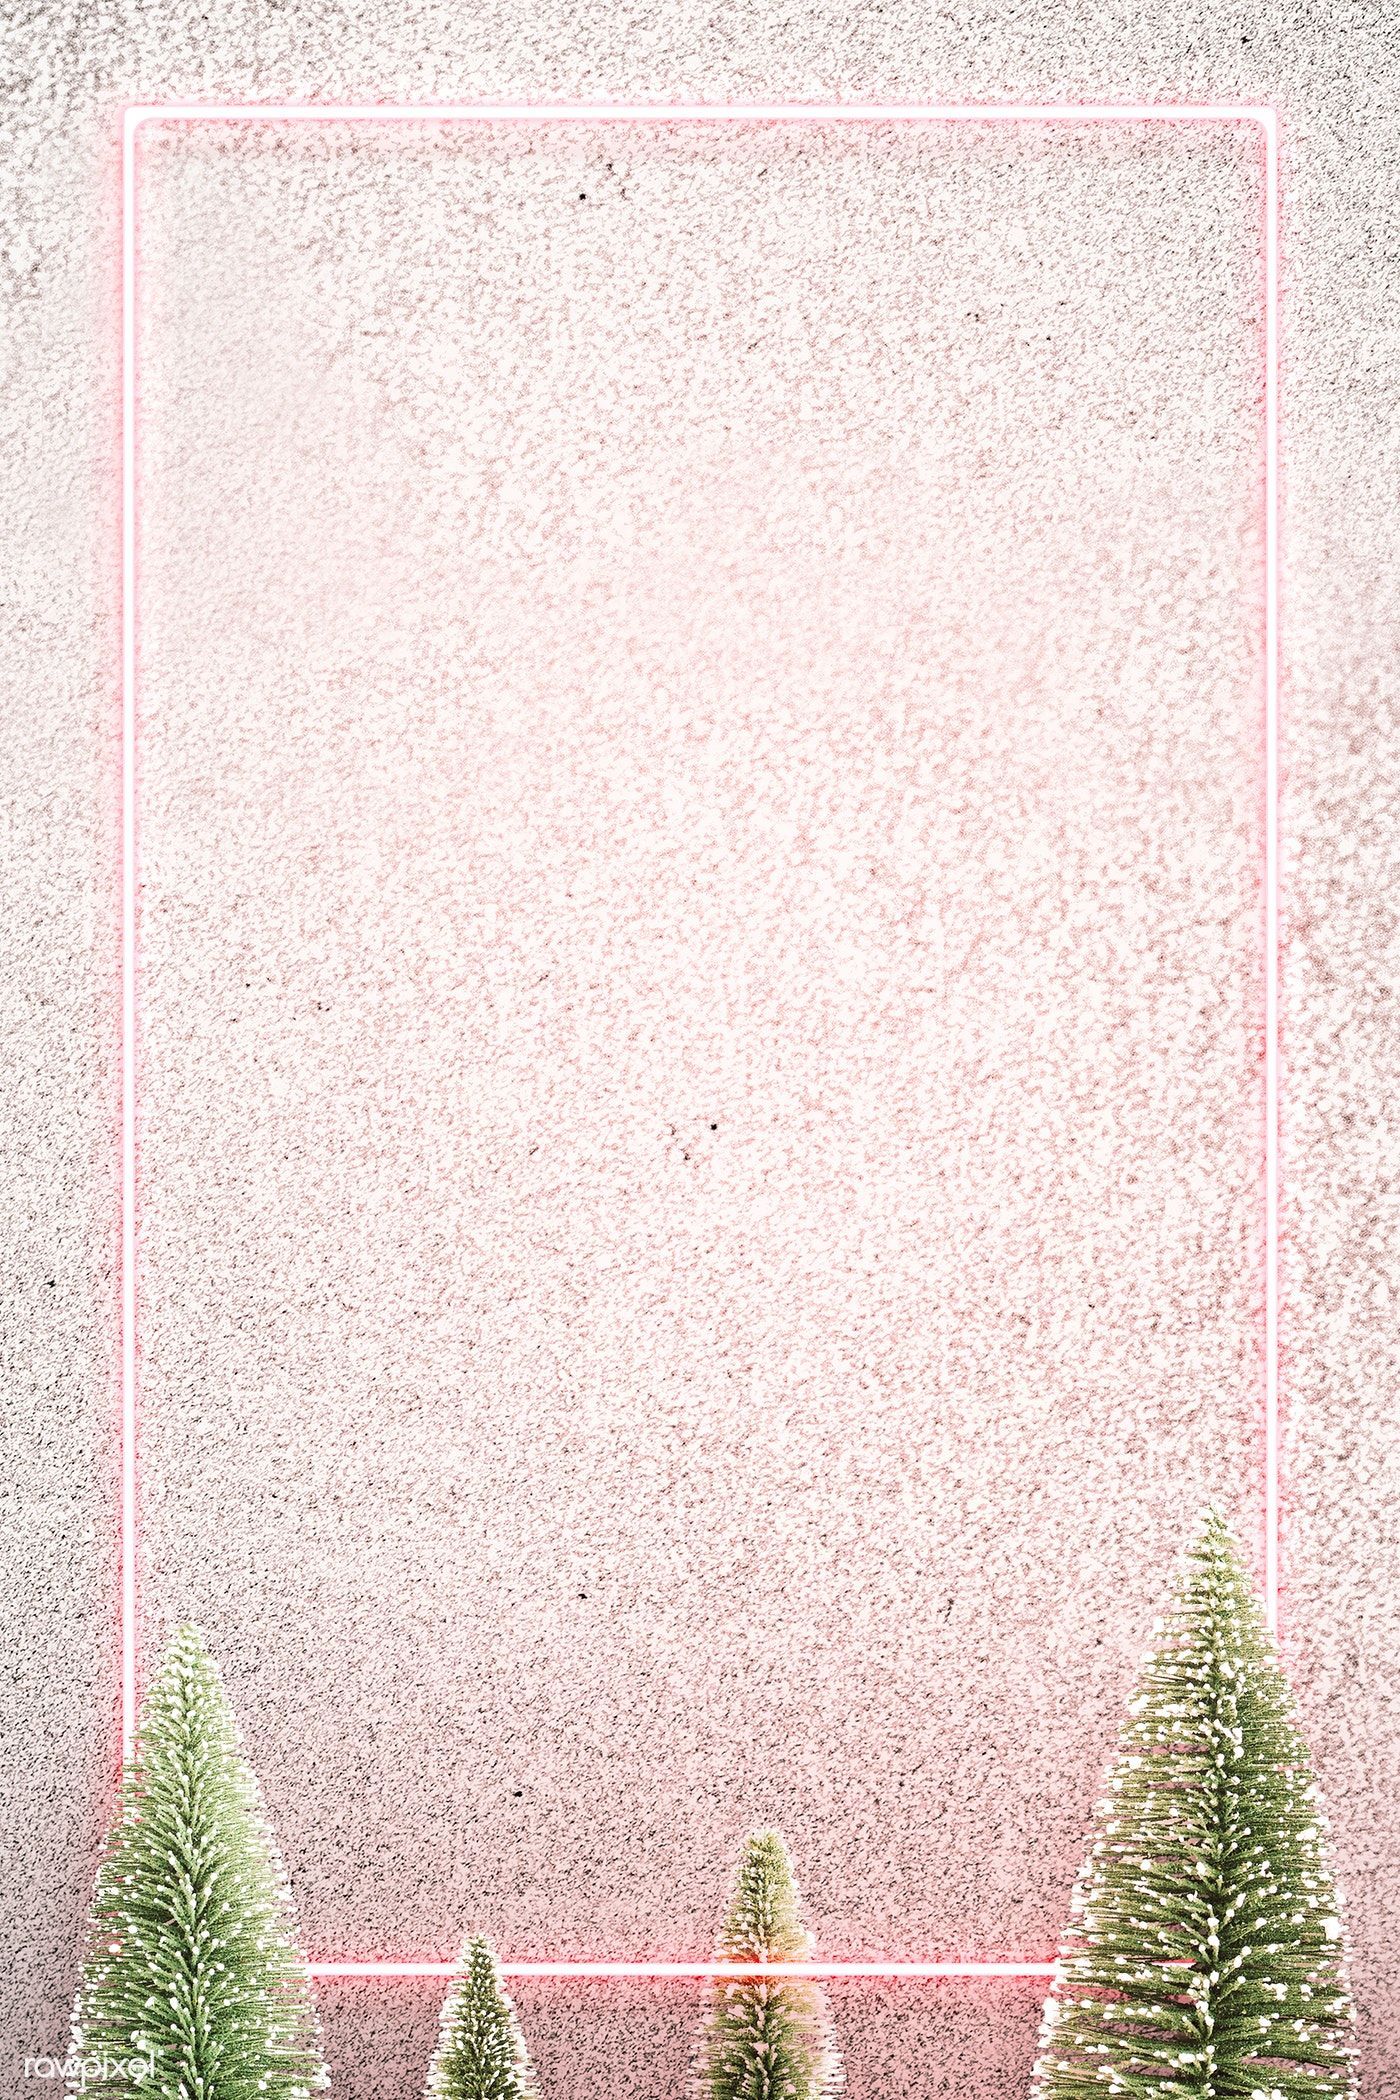 Download premium image of Pink neon frame on snowy Christmas background. Christmas background, Cute christmas wallpaper, Holiday background